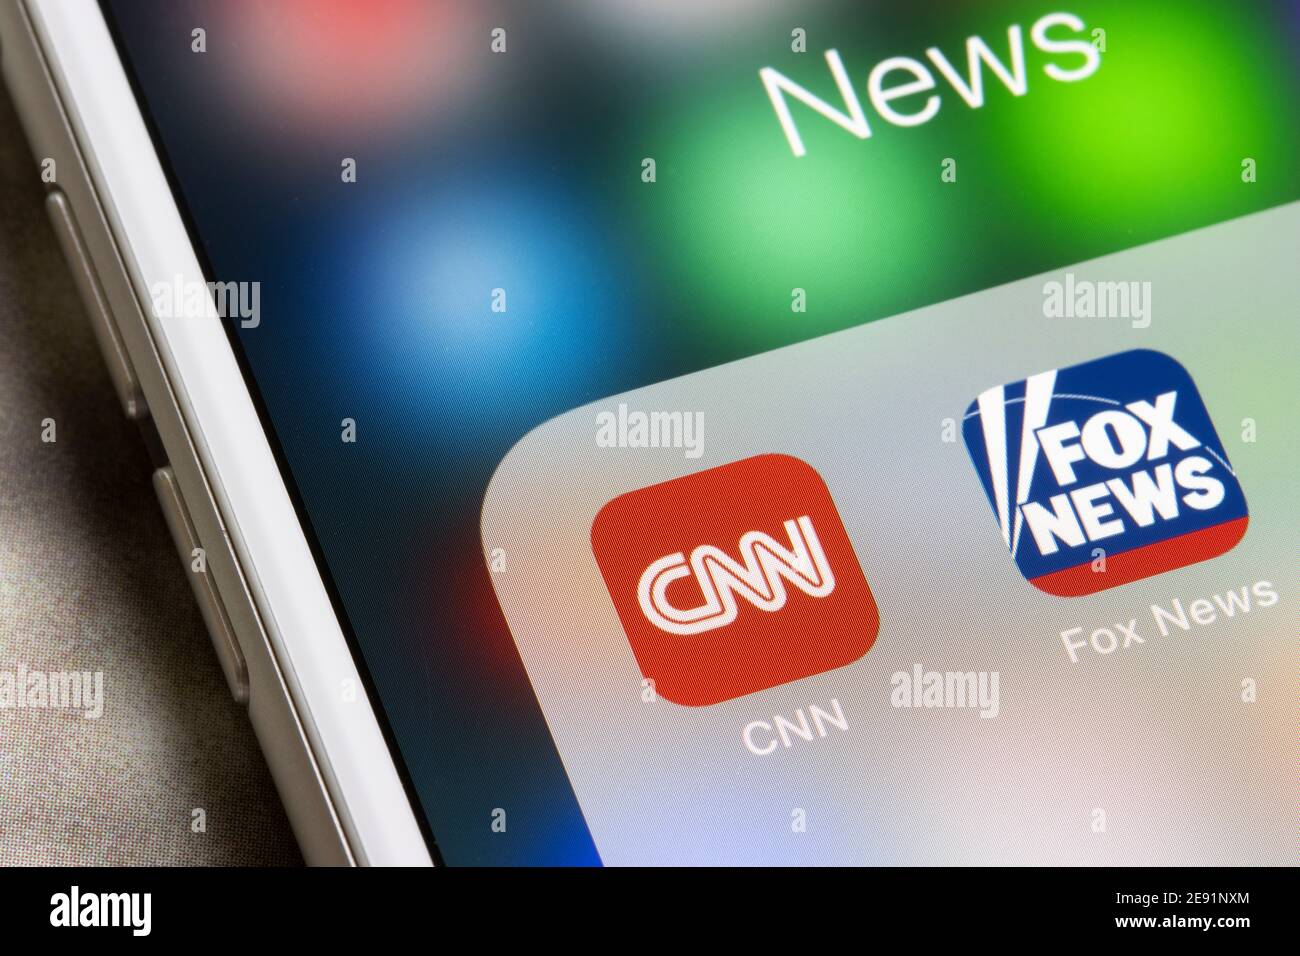 CNN and Fox News mobile app icons are seen on an iPhone on February 1, 2021. Leaning left (liberal) news versus leaning right (conservative) news. Stock Photo